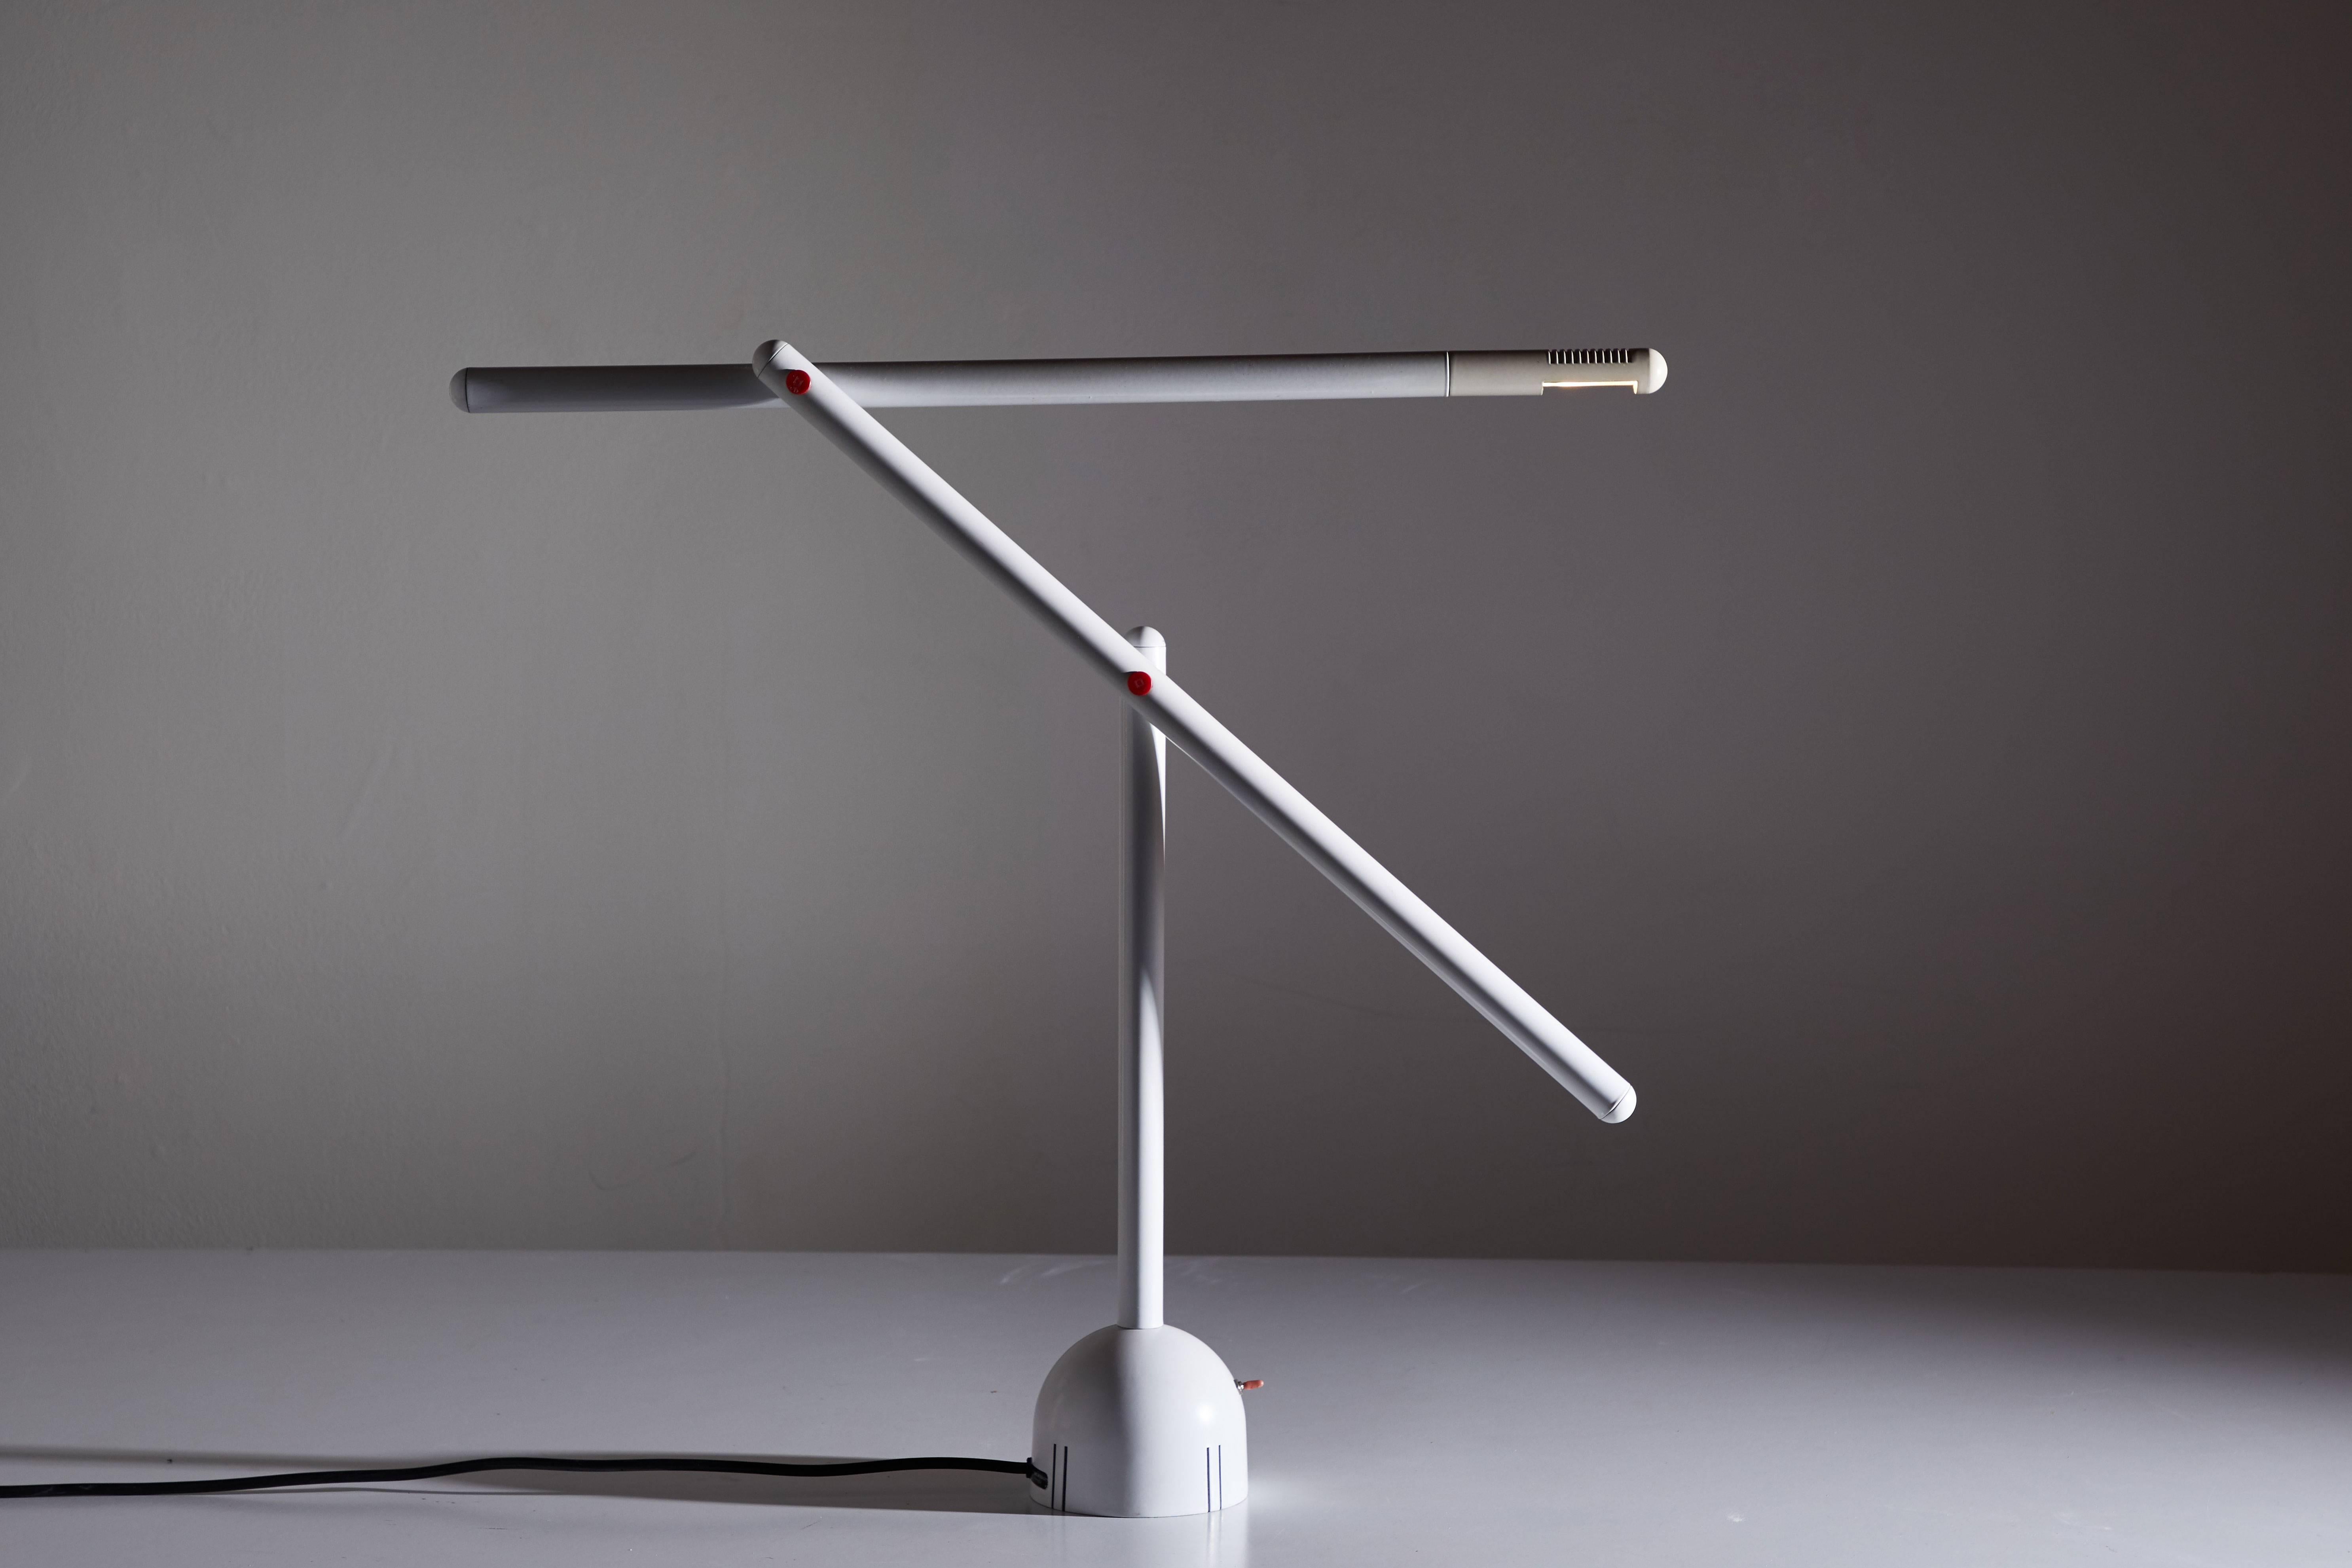 Articulated Mira table lamp by Mario Arnaboldi designed in Italy, circa 1980s. Enameled metal and aluminum construction with pivoting head. Original cord. Takes one G9 halogen bulb. Original finish. Original manufacturers label. Dimensions are